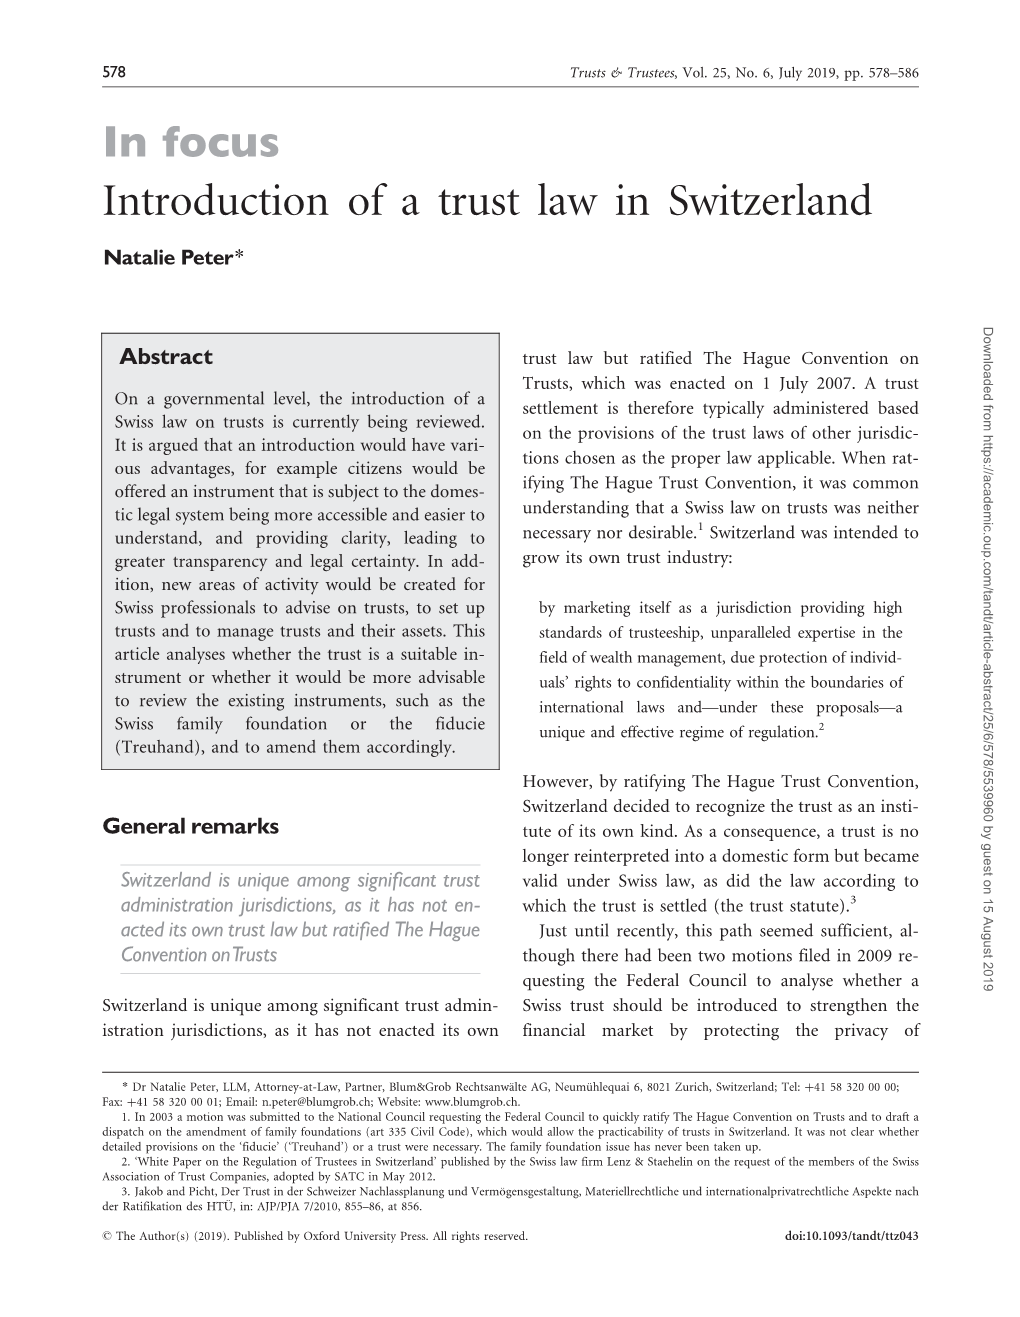 In Focus Introduction of a Trust Law in Switzerland